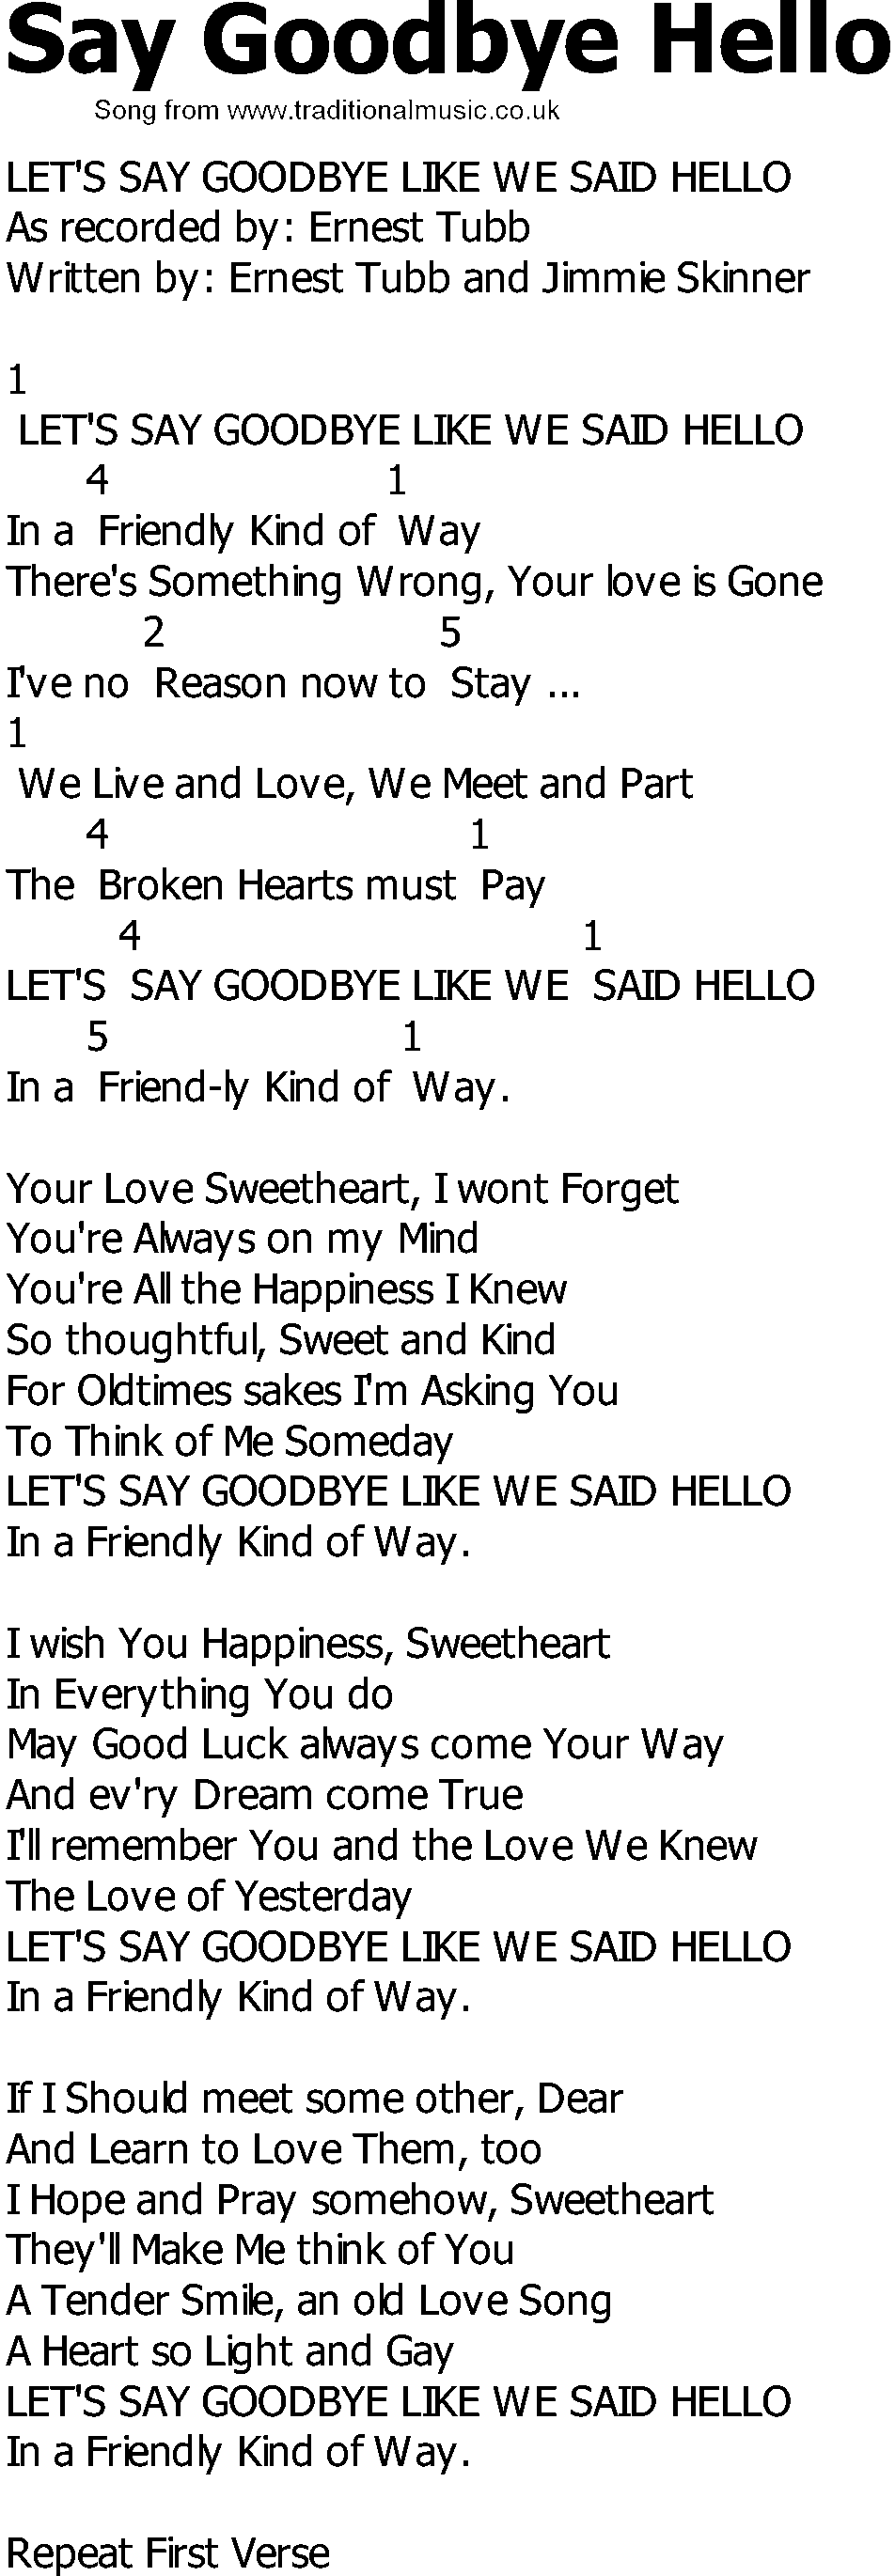 Old Country song lyrics with chords - Say Goodbye Hello